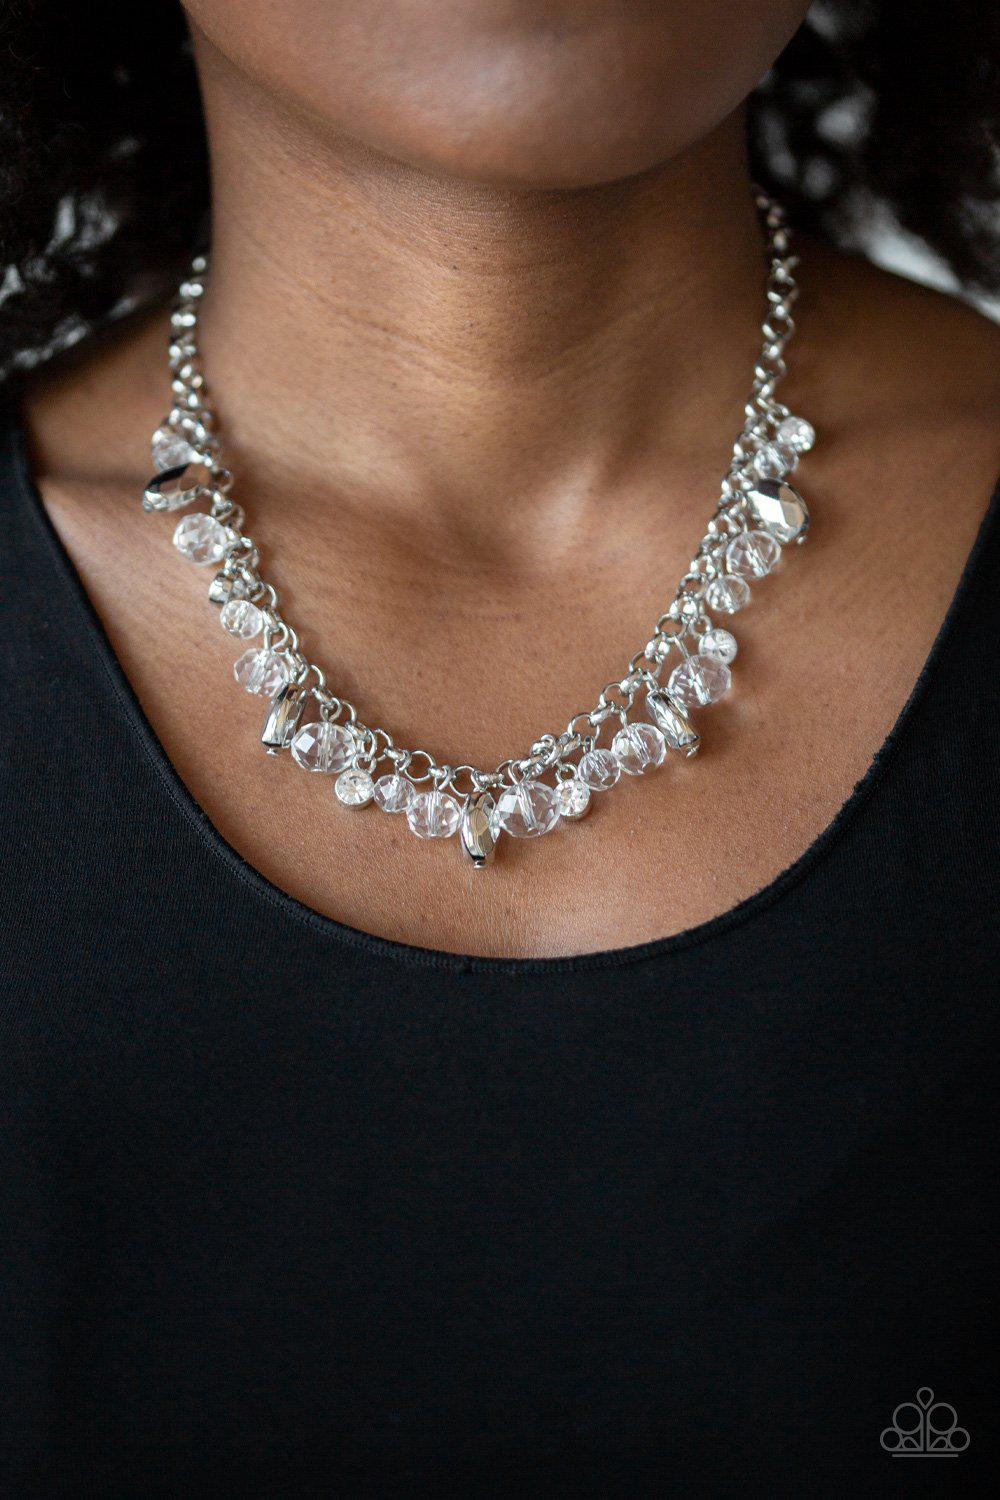 Downstage Dazzle White Necklace - Paparazzi Accessories - model -CarasShop.com - $5 Jewelry by Cara Jewels